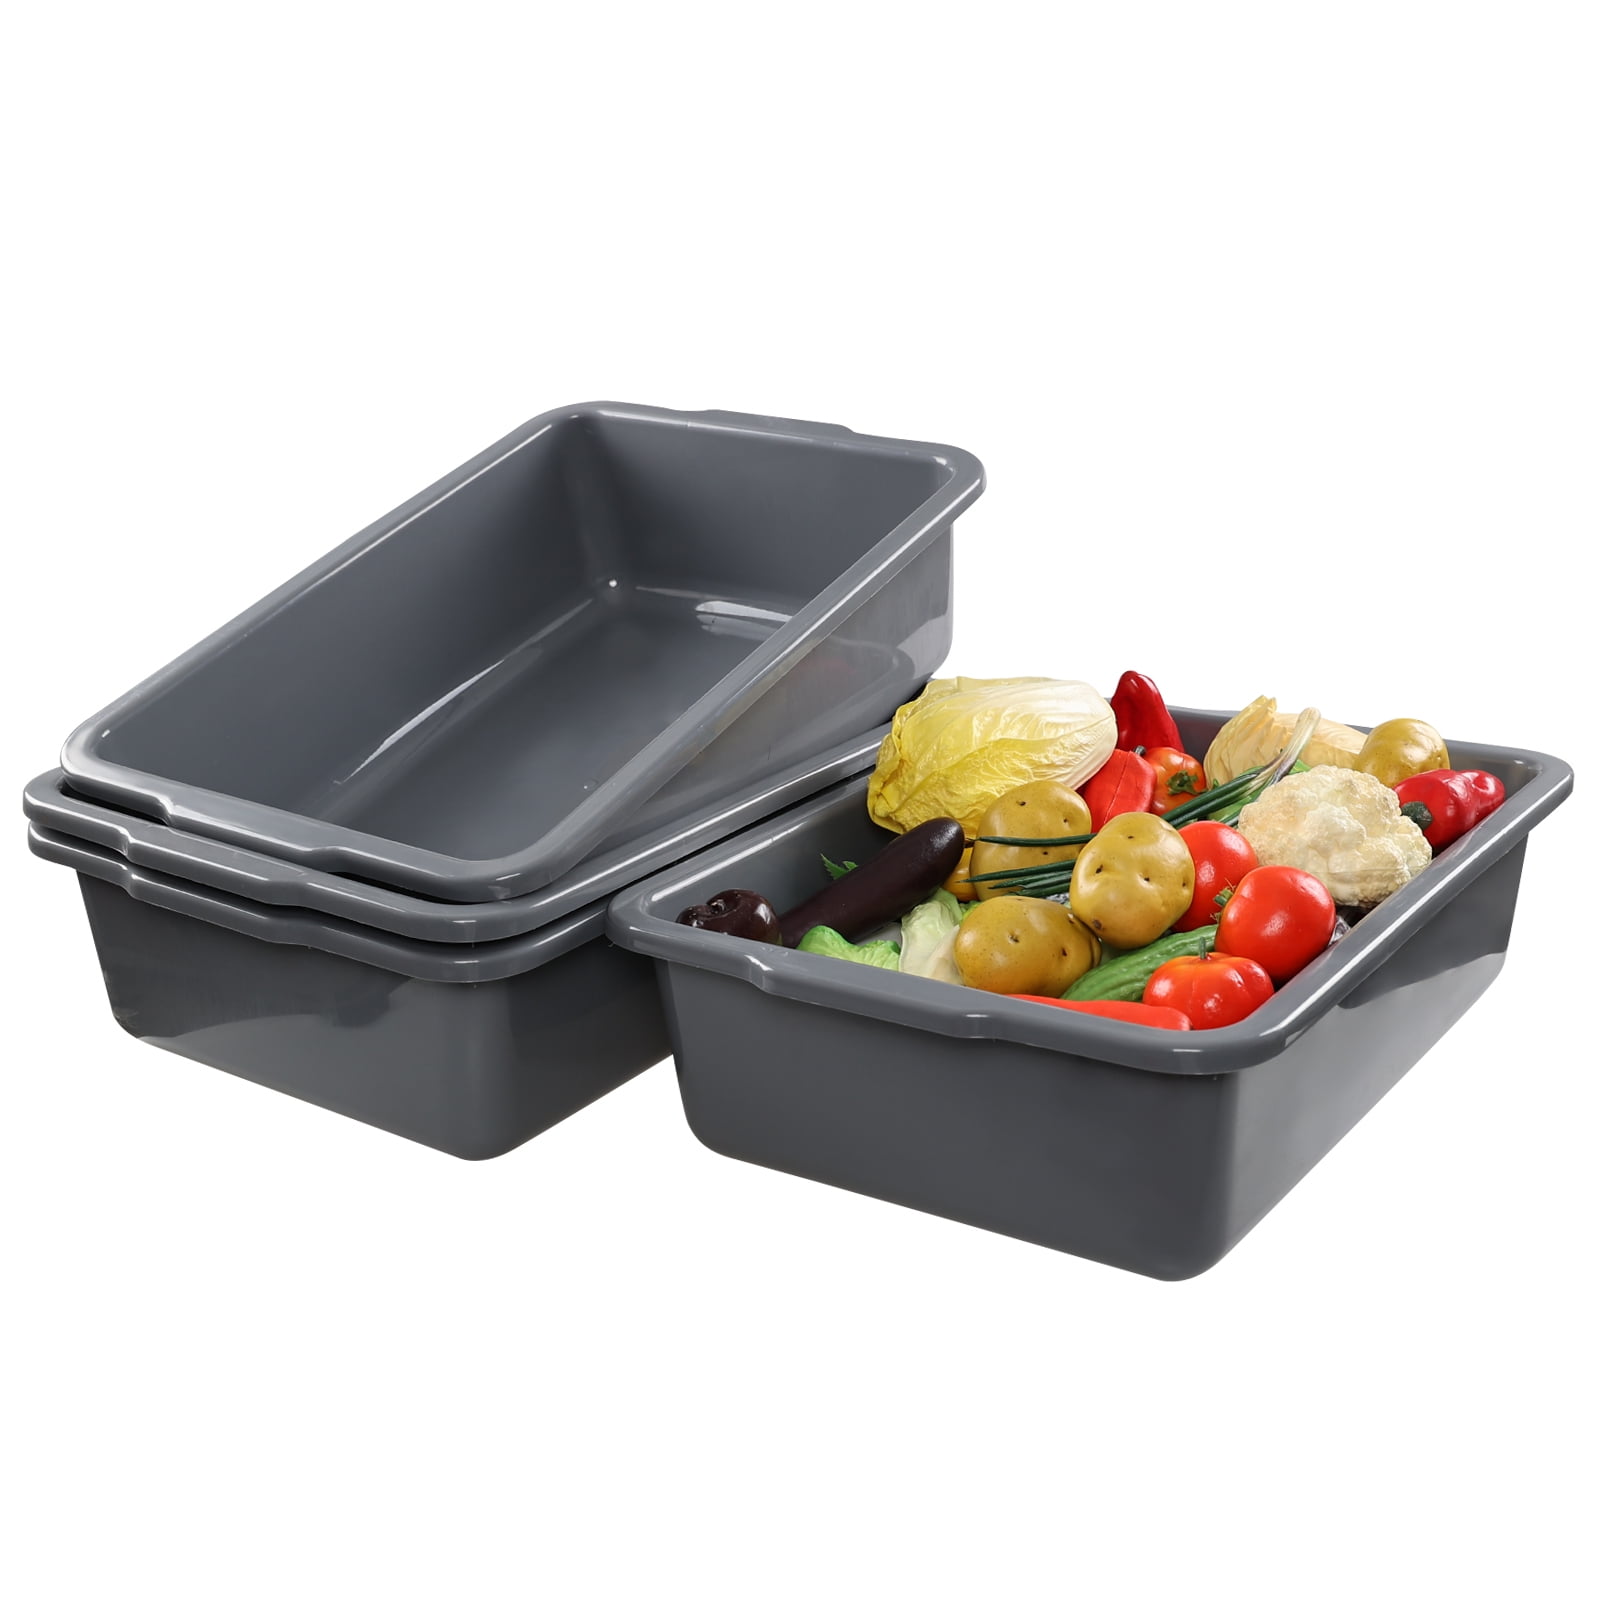  Wekioger 3 Pack Bus Tubs Commercial, 13 L Meat Tubs